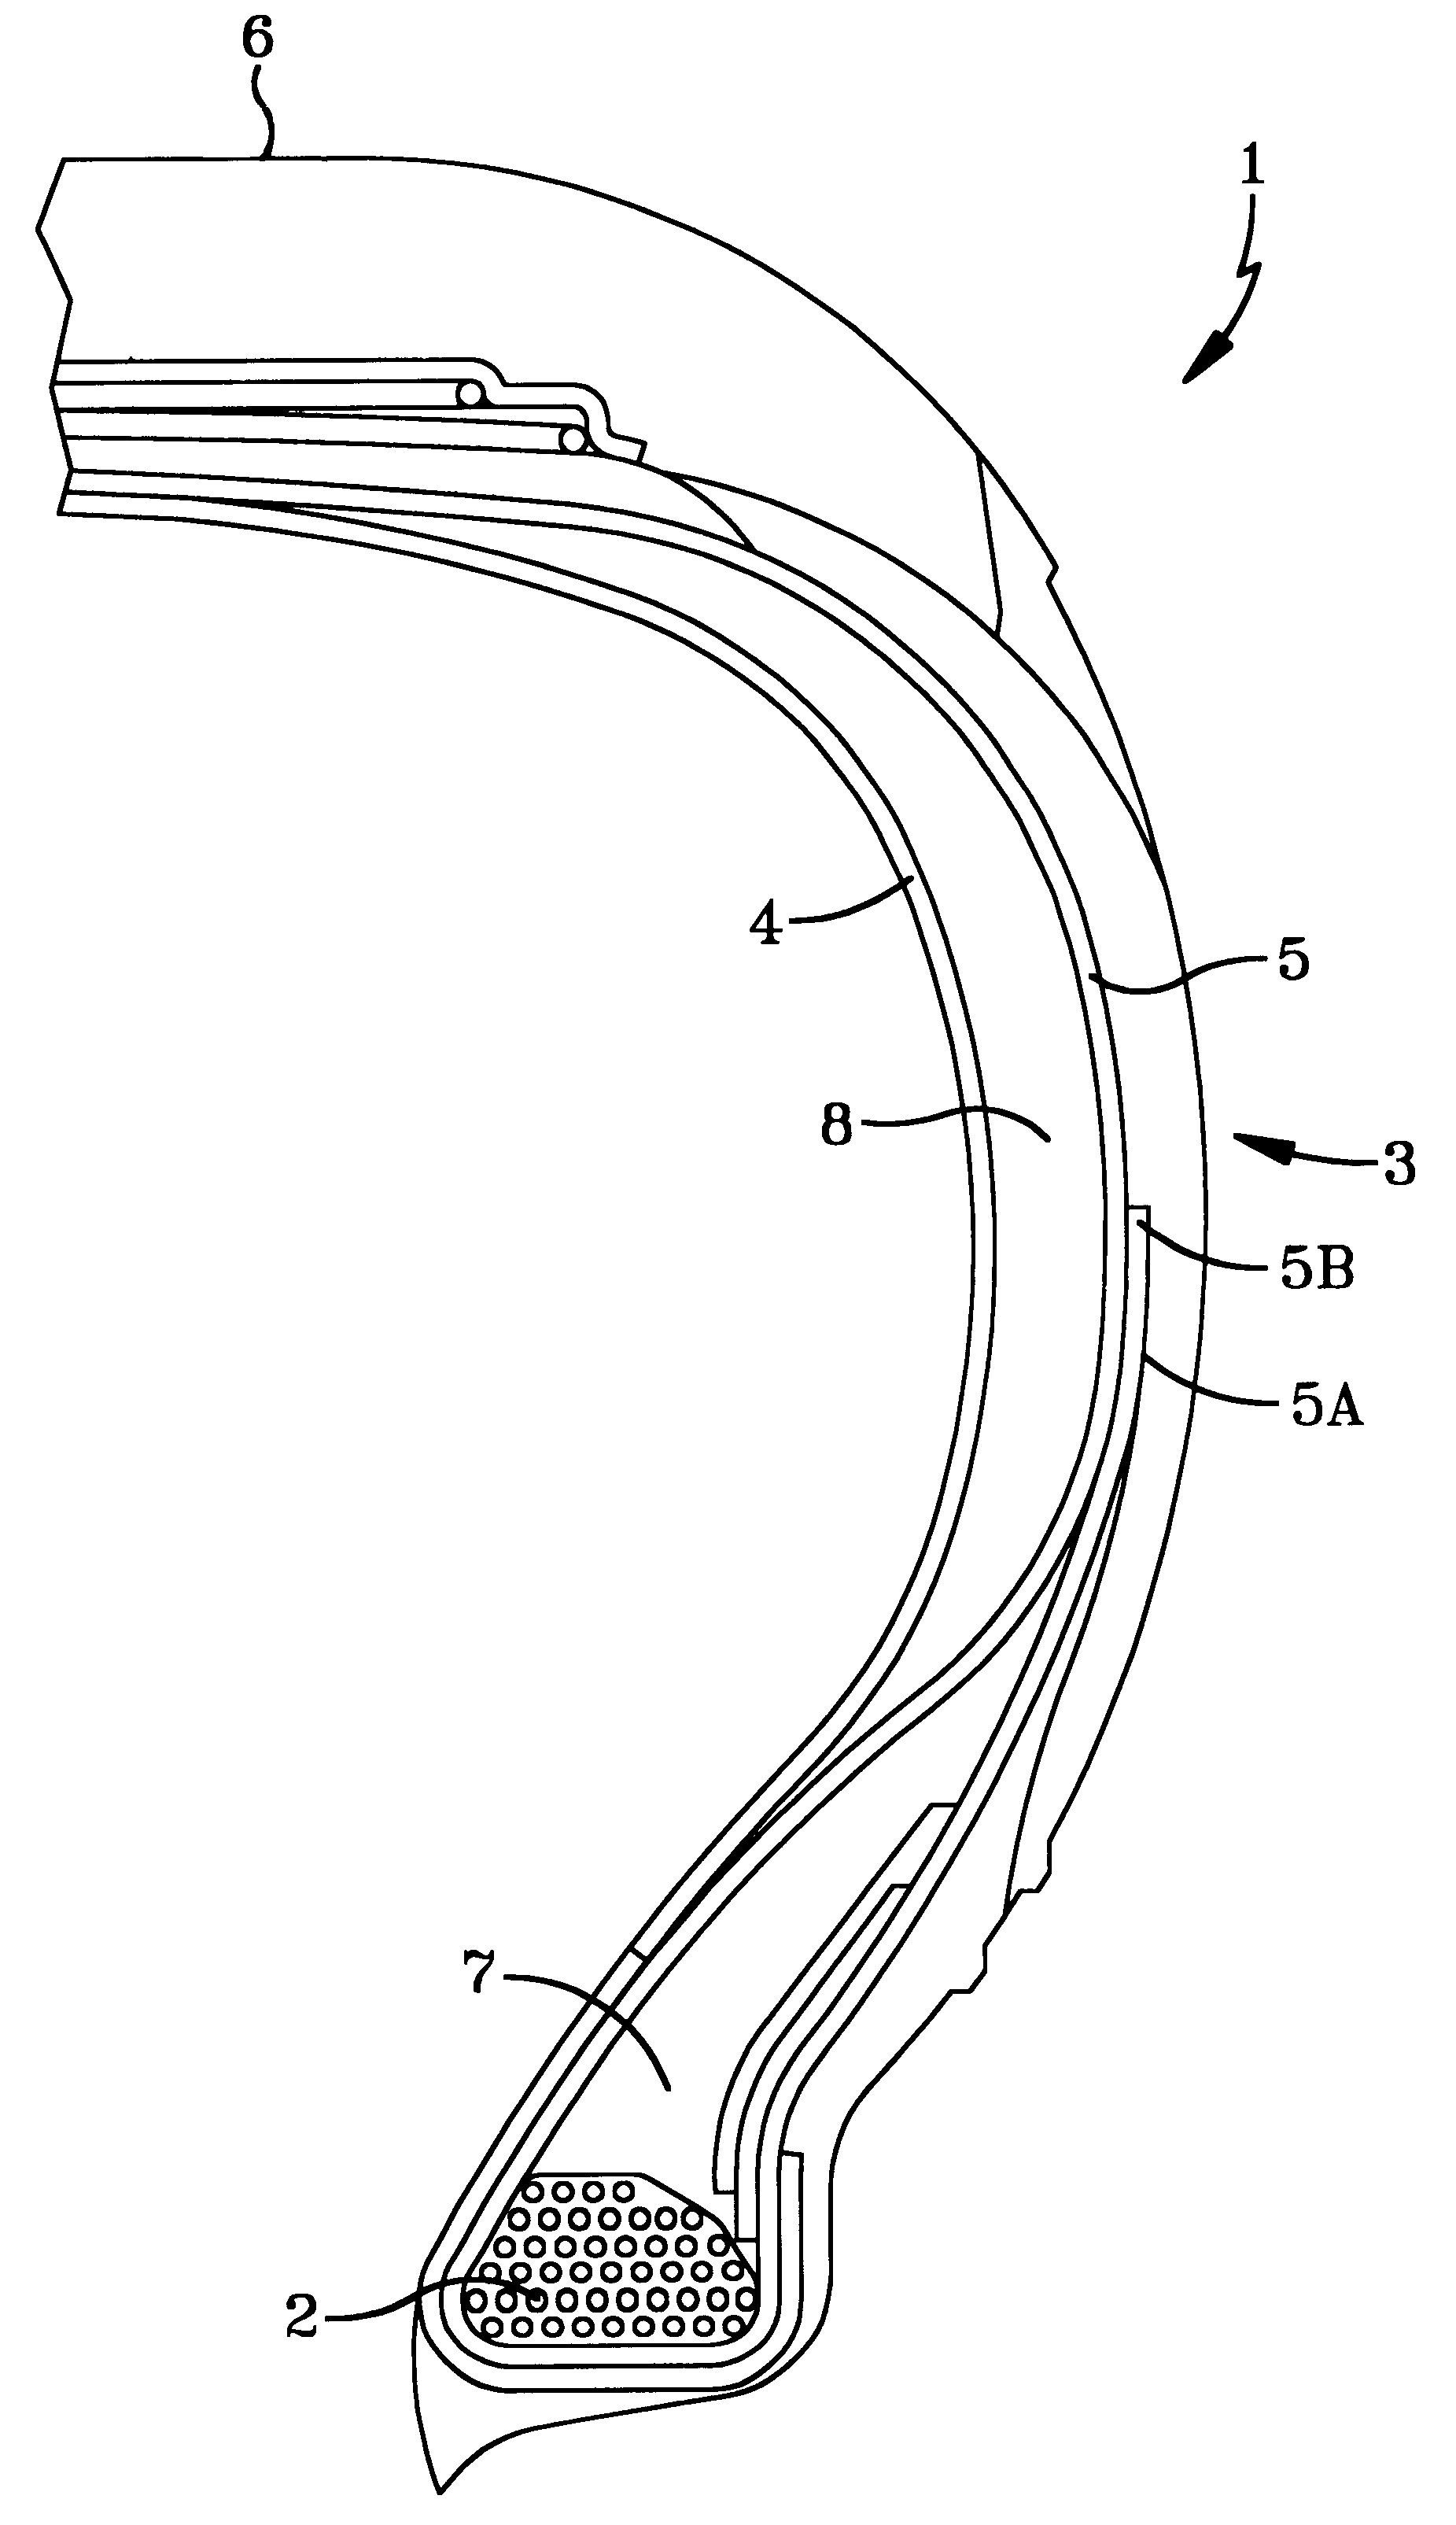 Tire with sidewall rubber insert